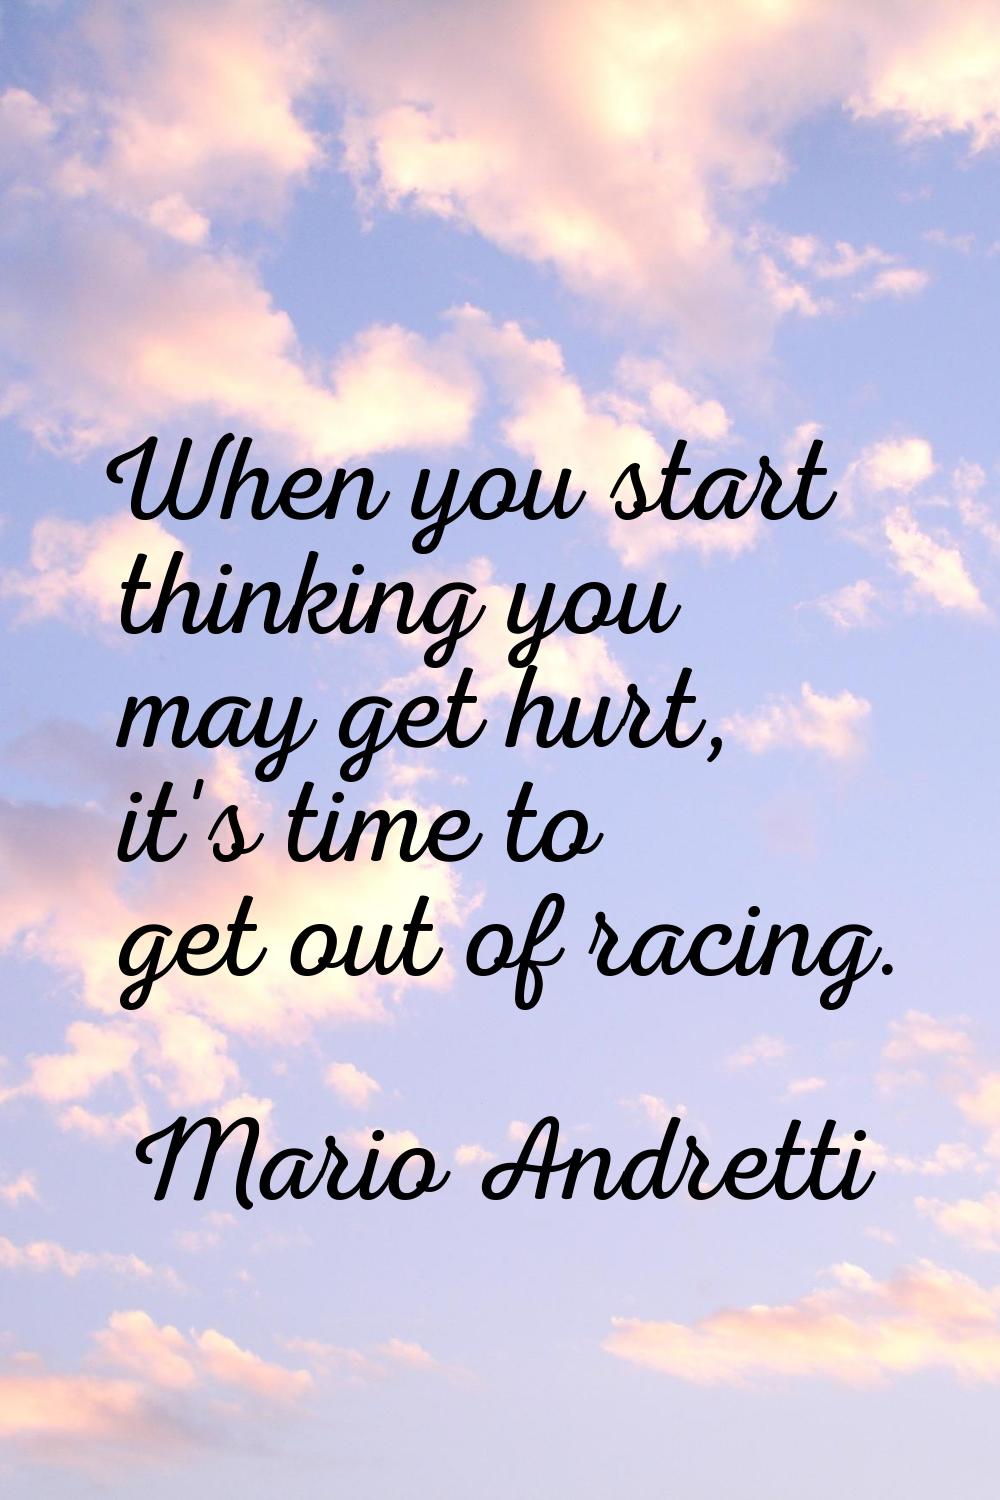 When you start thinking you may get hurt, it's time to get out of racing.